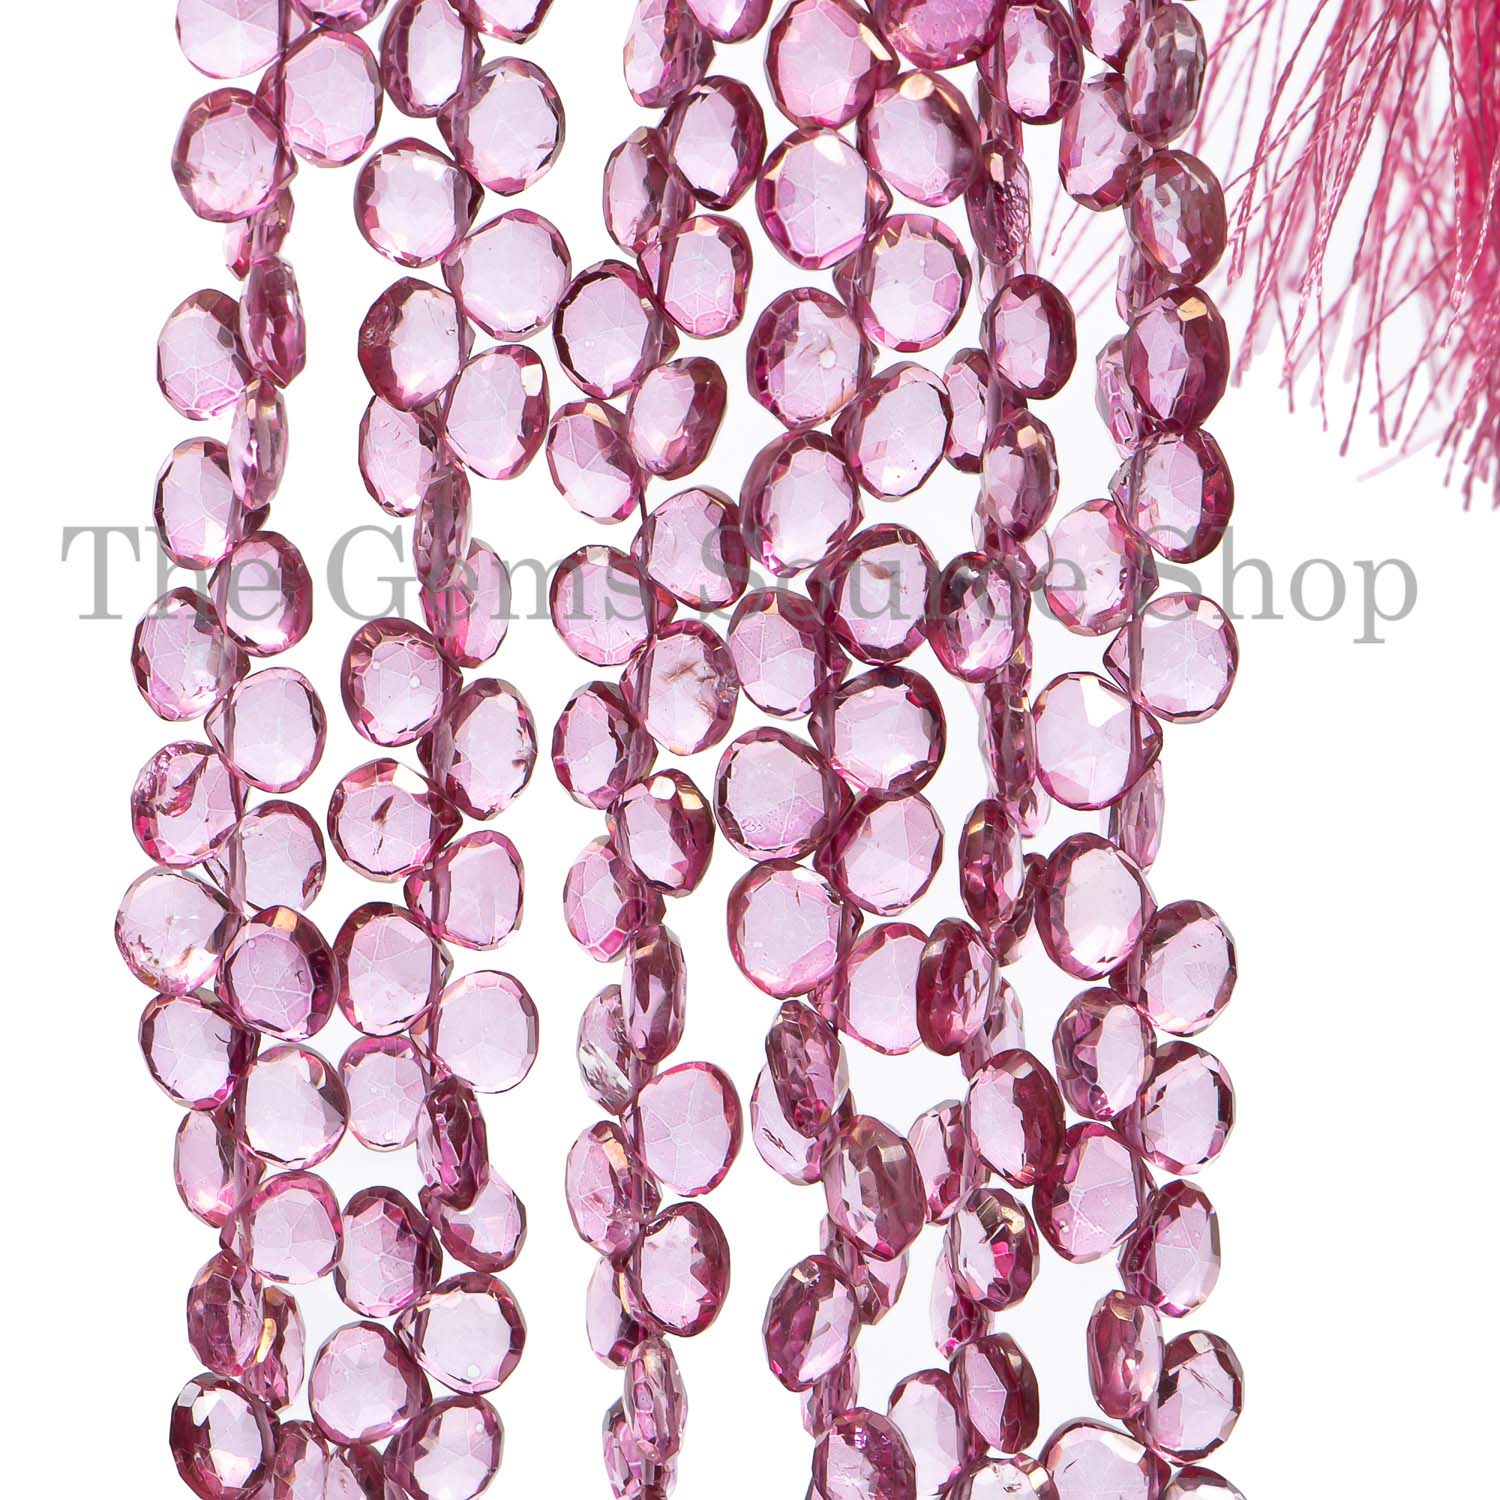 Pink Mystic Topaz Faceted Heart Briolette, Gemstone Beads, Craft Loose Beads